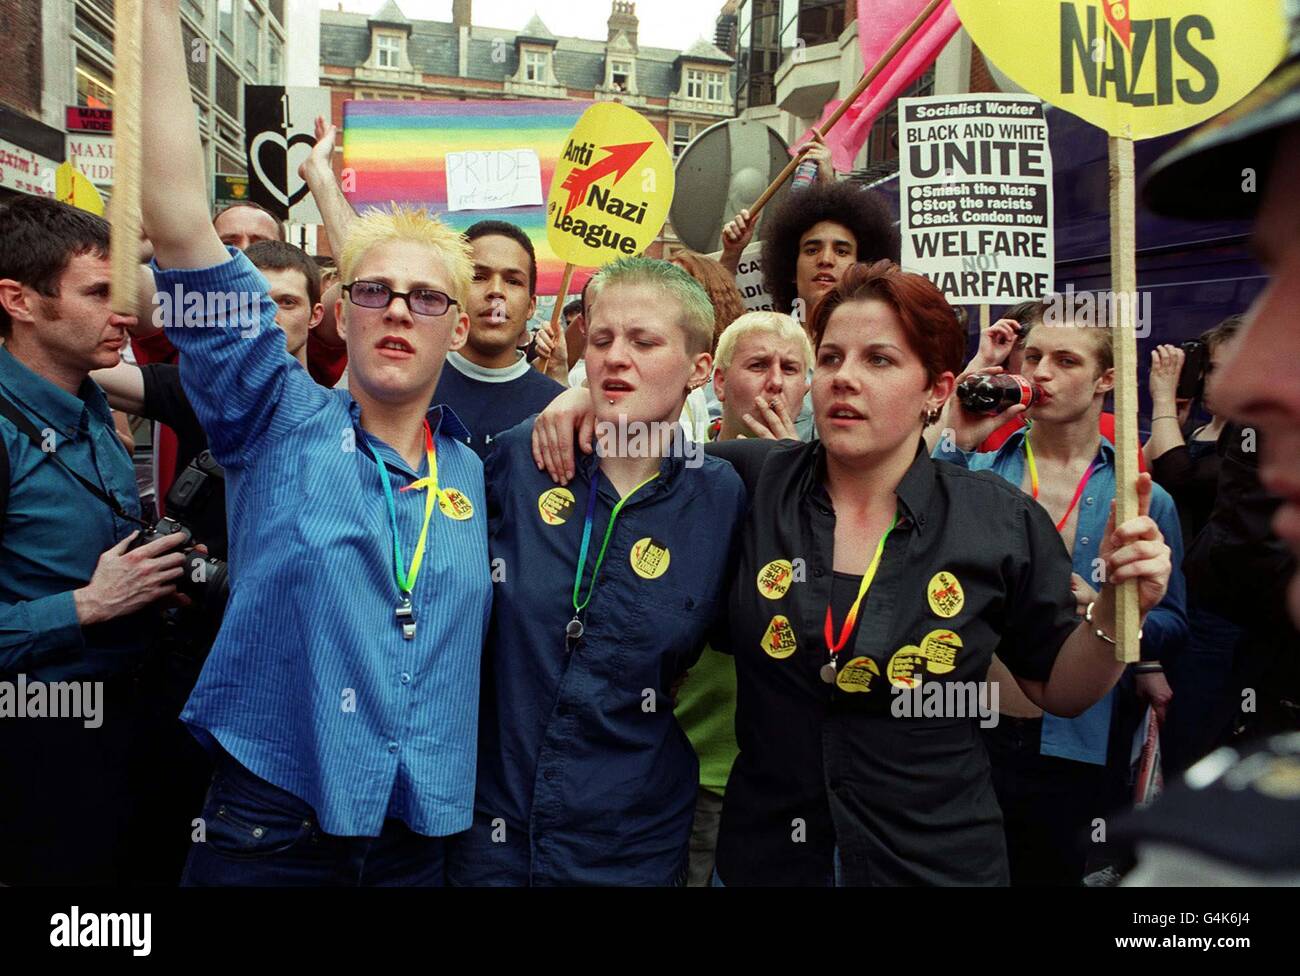 Demonstrators march through Westminster, London, in protest at the Brixton, Brick Lane and Soho nail bombings and racist violence. In the latest blast, three people were killed by a nail bomb explosion in the Admiral Duncan pub (April 30) in Soho, central London. Stock Photo